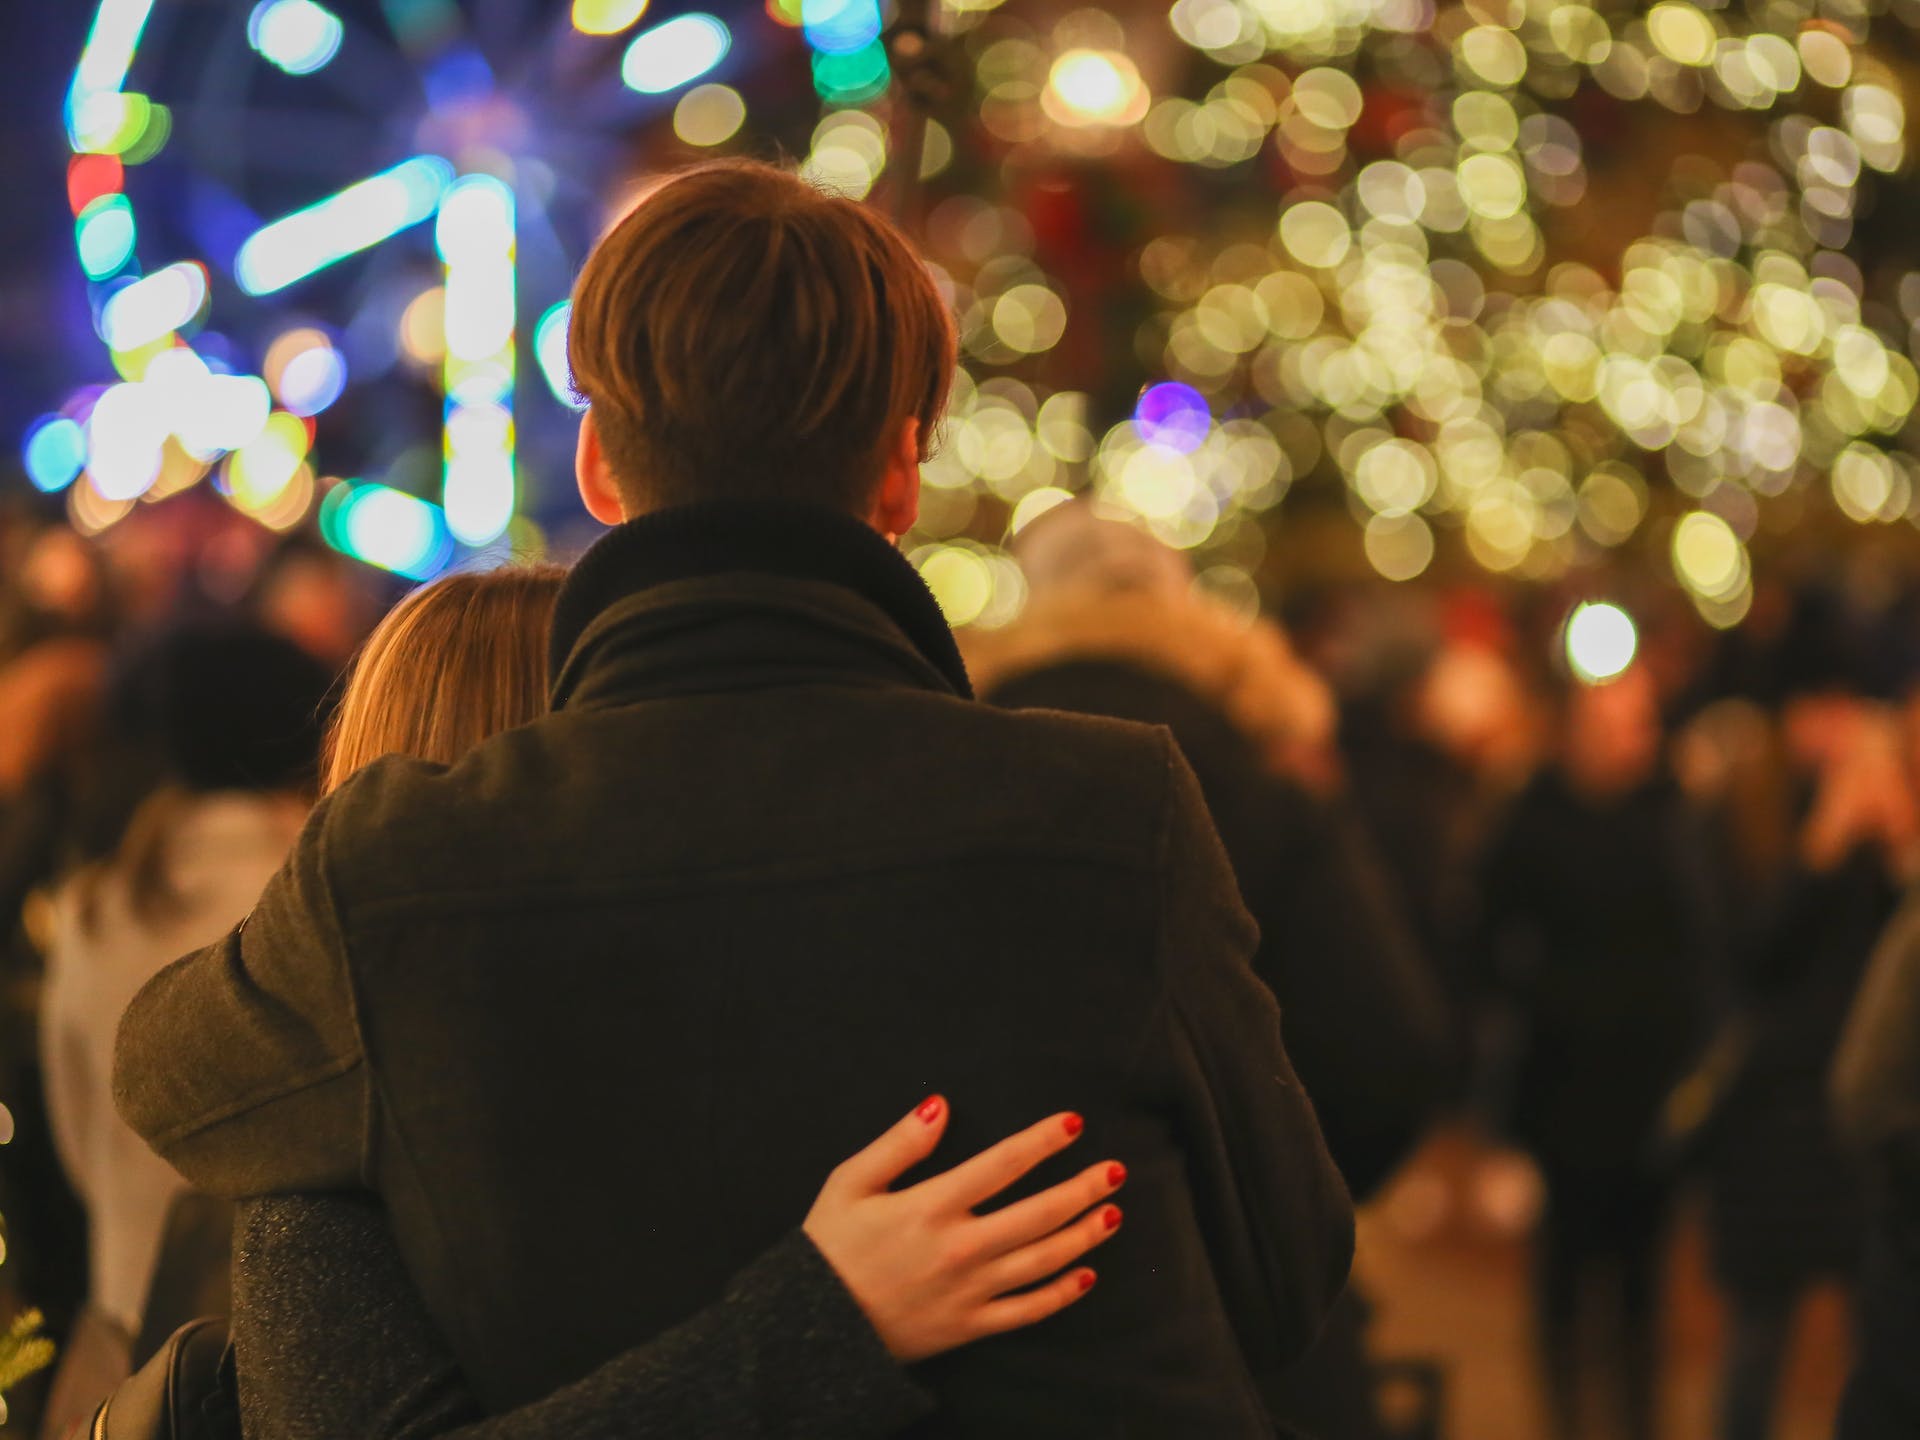 Couple looking at lights | Source: Pexels